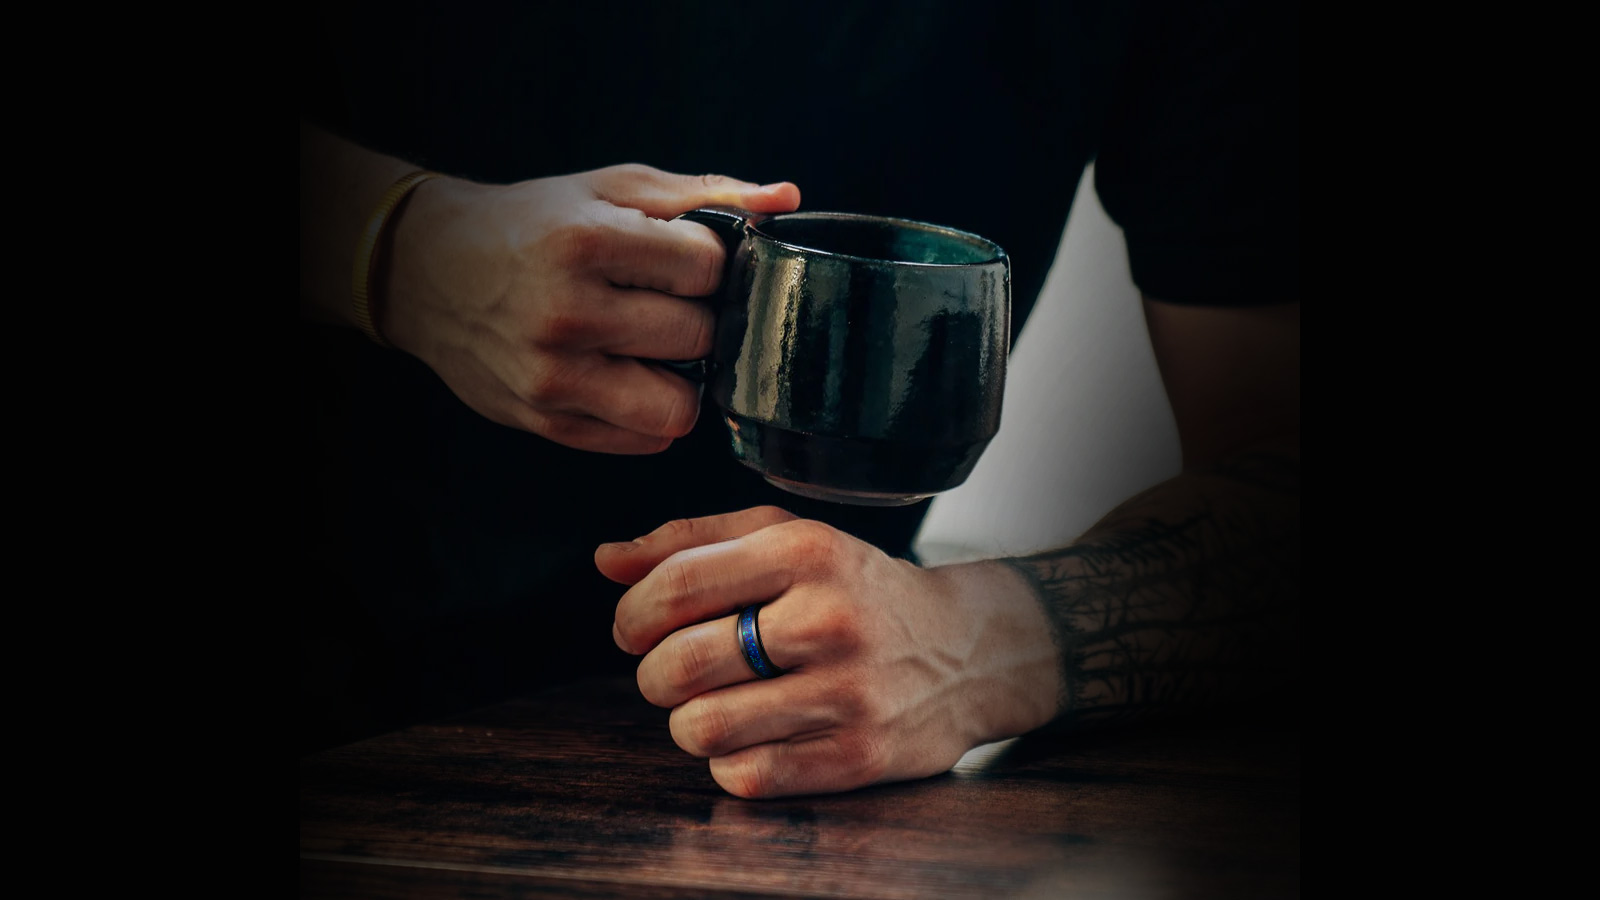 The man holds a cup in one hand and wears a blue meteorite ring in the other